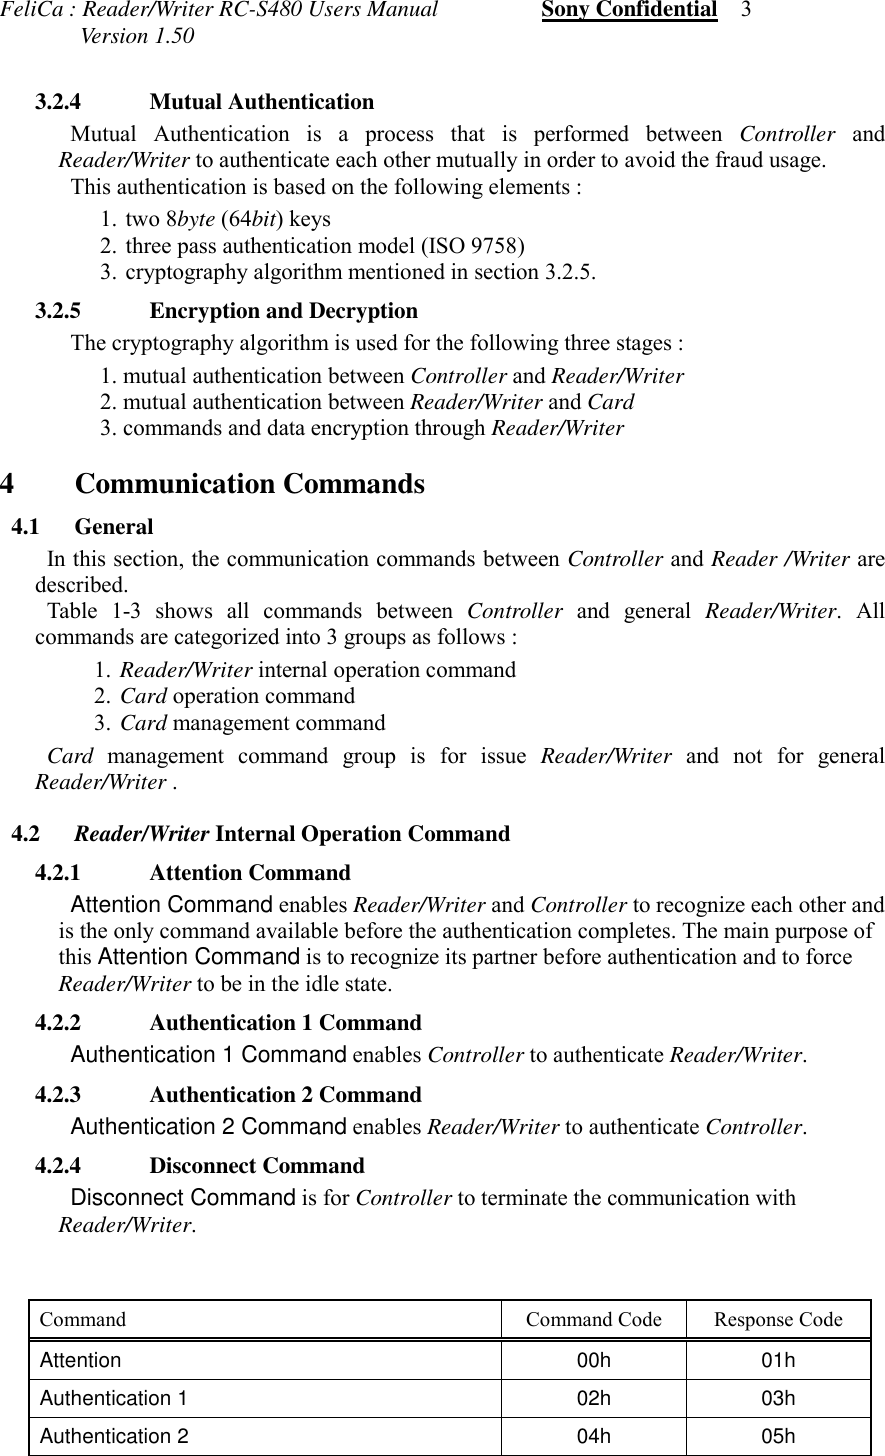 FeliCa : Reader/Writer RC-S480 Users Manual                  Sony Confidential    3              Version 1.503.2.4 Mutual AuthenticationMutual Authentication is a process that is performed between Controller andReader/Writer to authenticate each other mutually in order to avoid the fraud usage.This authentication is based on the following elements :1.  two 8byte (64bit) keys2.  three pass authentication model (ISO 9758)3.  cryptography algorithm mentioned in section 3.2.5. 3.2.5 Encryption and Decryption The cryptography algorithm is used for the following three stages :1. mutual authentication between Controller and Reader/Writer2. mutual authentication between Reader/Writer and Card3. commands and data encryption through Reader/Writer4 Communication Commands 4.1 General In this section, the communication commands between Controller and Reader /Writer aredescribed. Table 1-3 shows all commands between Controller and general Reader/Writer. Allcommands are categorized into 3 groups as follows :1. Reader/Writer internal operation command2. Card operation command3. Card management command Card management command group is for issue Reader/Writer and not for generalReader/Writer . 4.2 Reader/Writer Internal Operation Command 4.2.1 Attention Command Attention Command enables Reader/Writer and Controller to recognize each other andis the only command available before the authentication completes. The main purpose ofthis Attention Command is to recognize its partner before authentication and to forceReader/Writer to be in the idle state. 4.2.2 Authentication 1 Command Authentication 1 Command enables Controller to authenticate Reader/Writer. 4.2.3 Authentication 2 Command Authentication 2 Command enables Reader/Writer to authenticate Controller. 4.2.4 Disconnect Command Disconnect Command is for Controller to terminate the communication withReader/Writer. Command Command Code Response CodeAttention 00h 01hAuthentication 1 02h 03hAuthentication 2 04h 05h